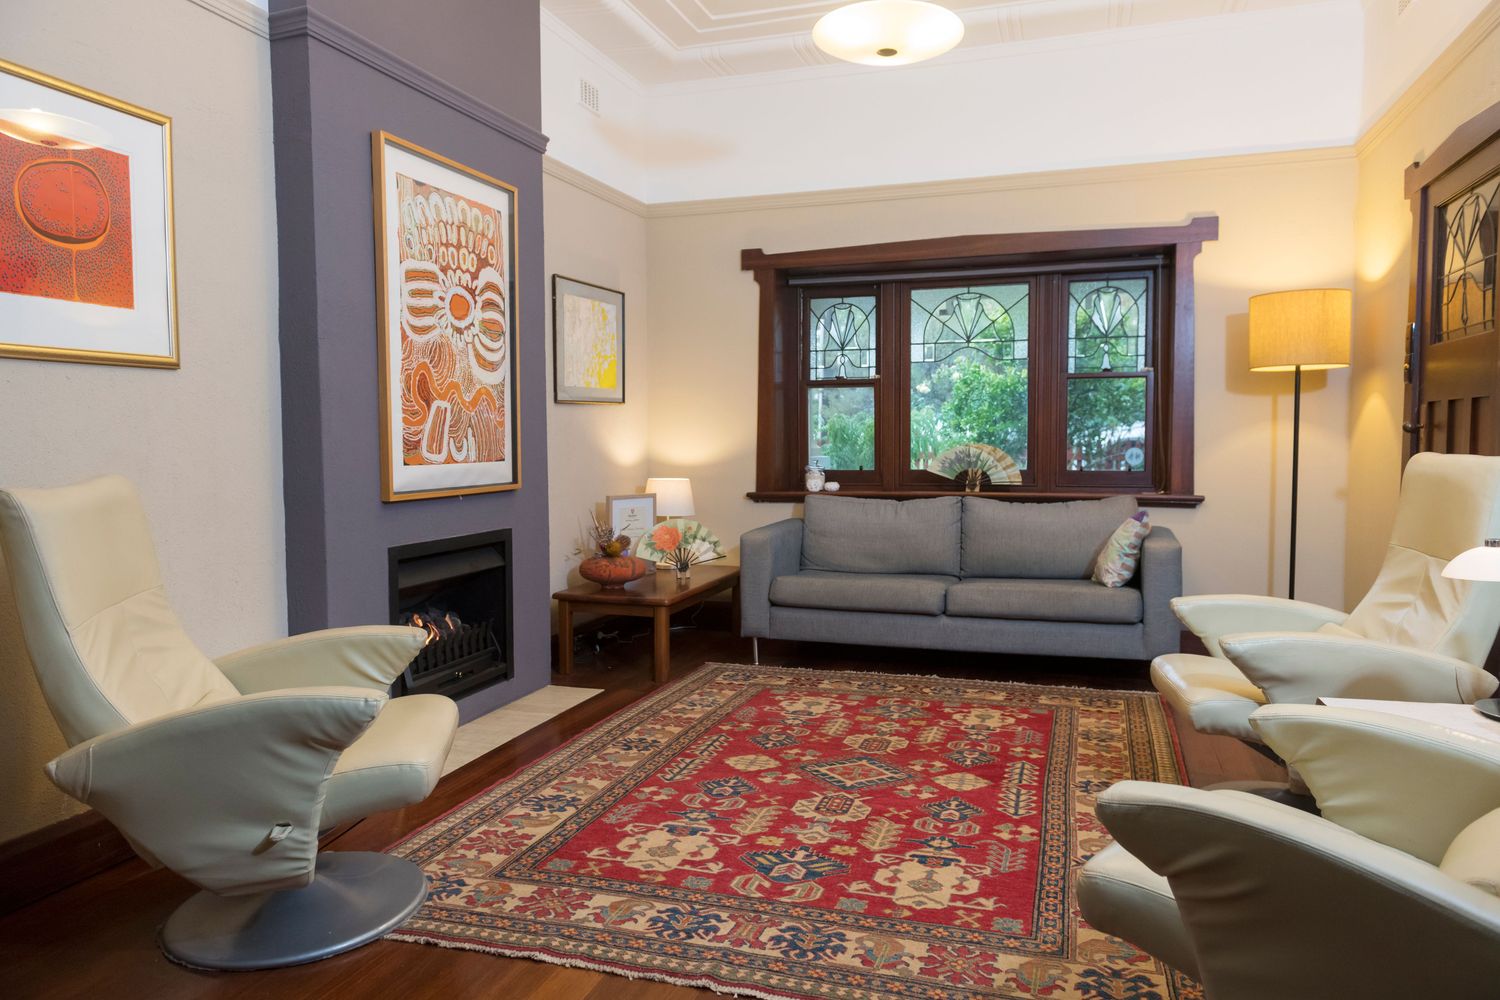 Gallery Photo of Navigator Counselling and Coaching is a warm, homey space where clients feel calm, safe and private. 